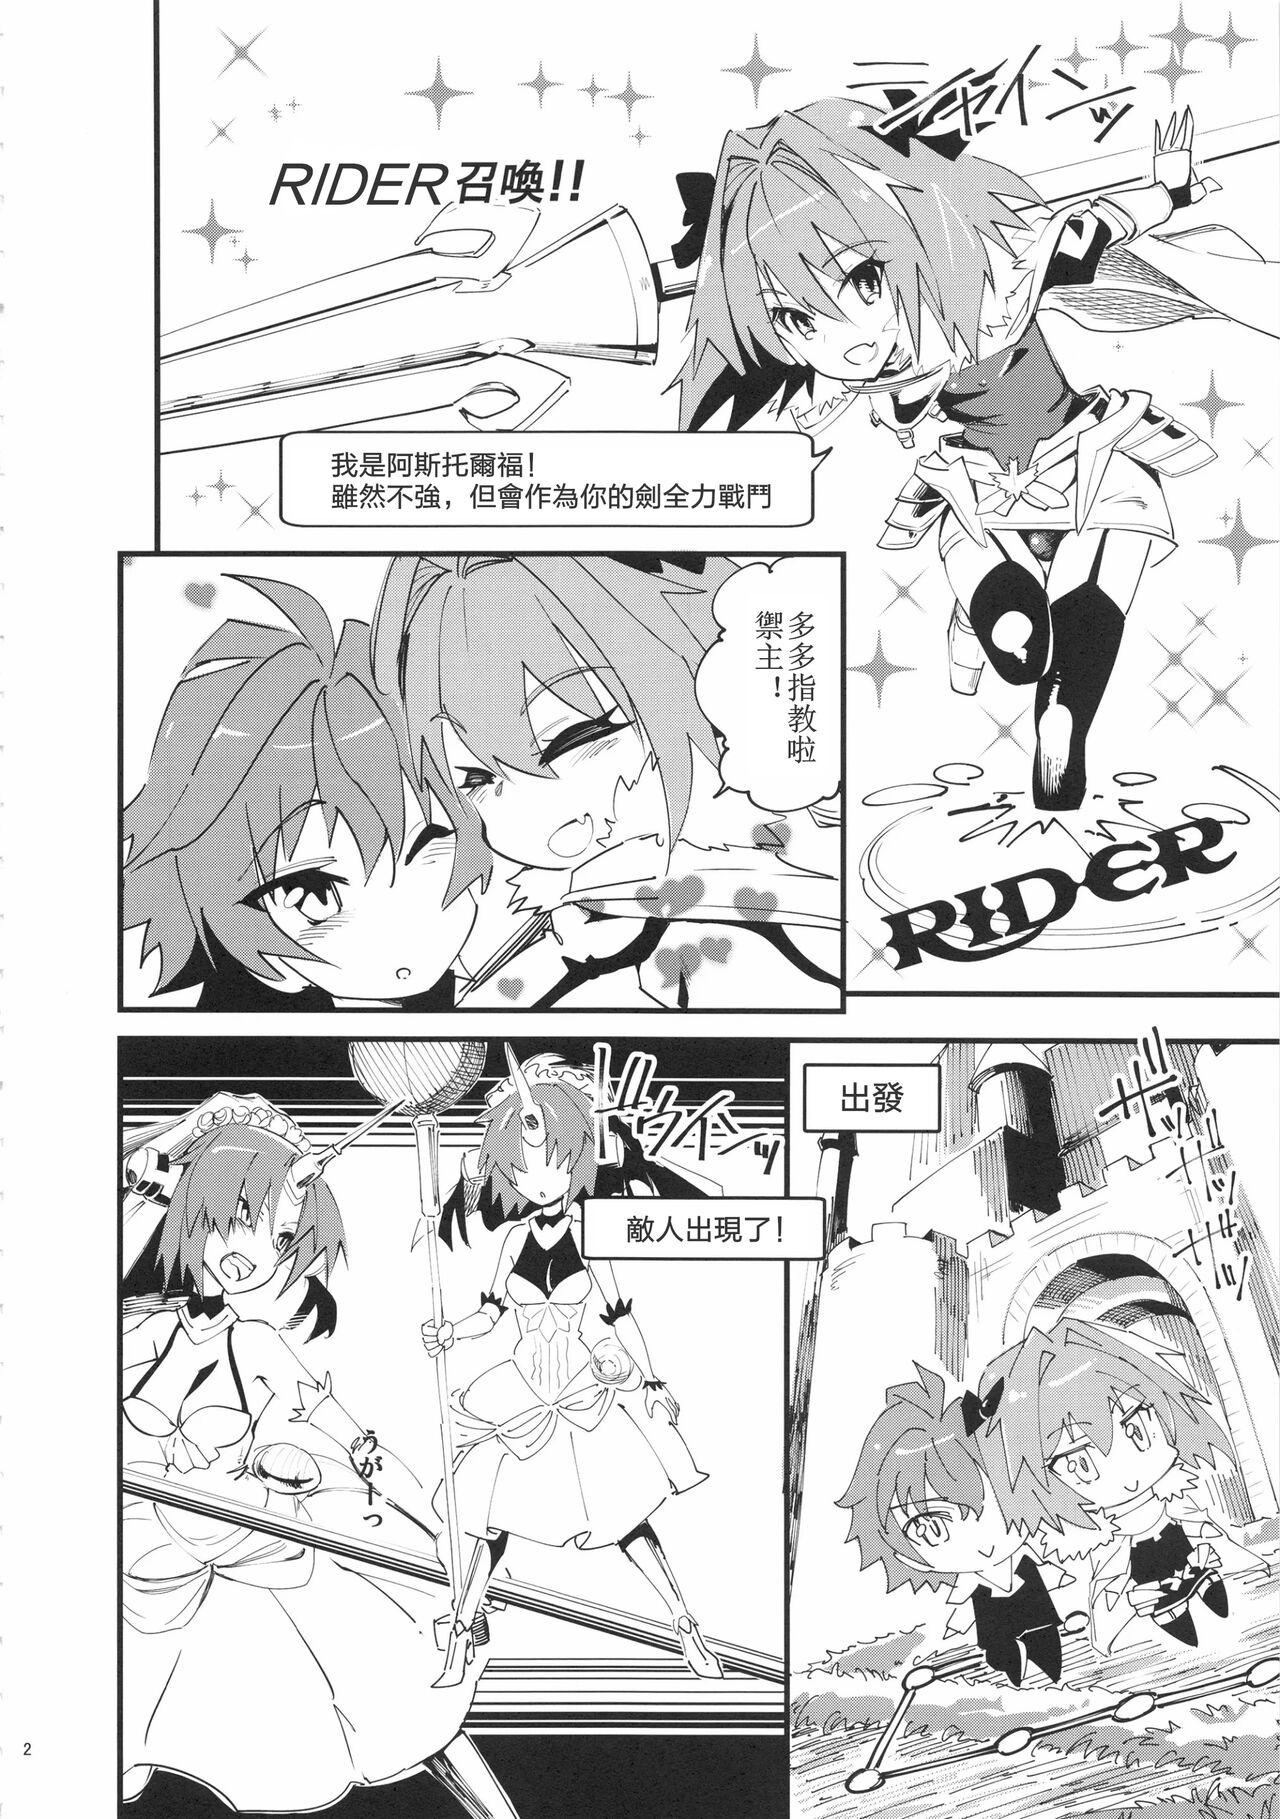 Rubbing CLASS CHANGE!! Brave Astolfo - Fate apocrypha British - Page 4